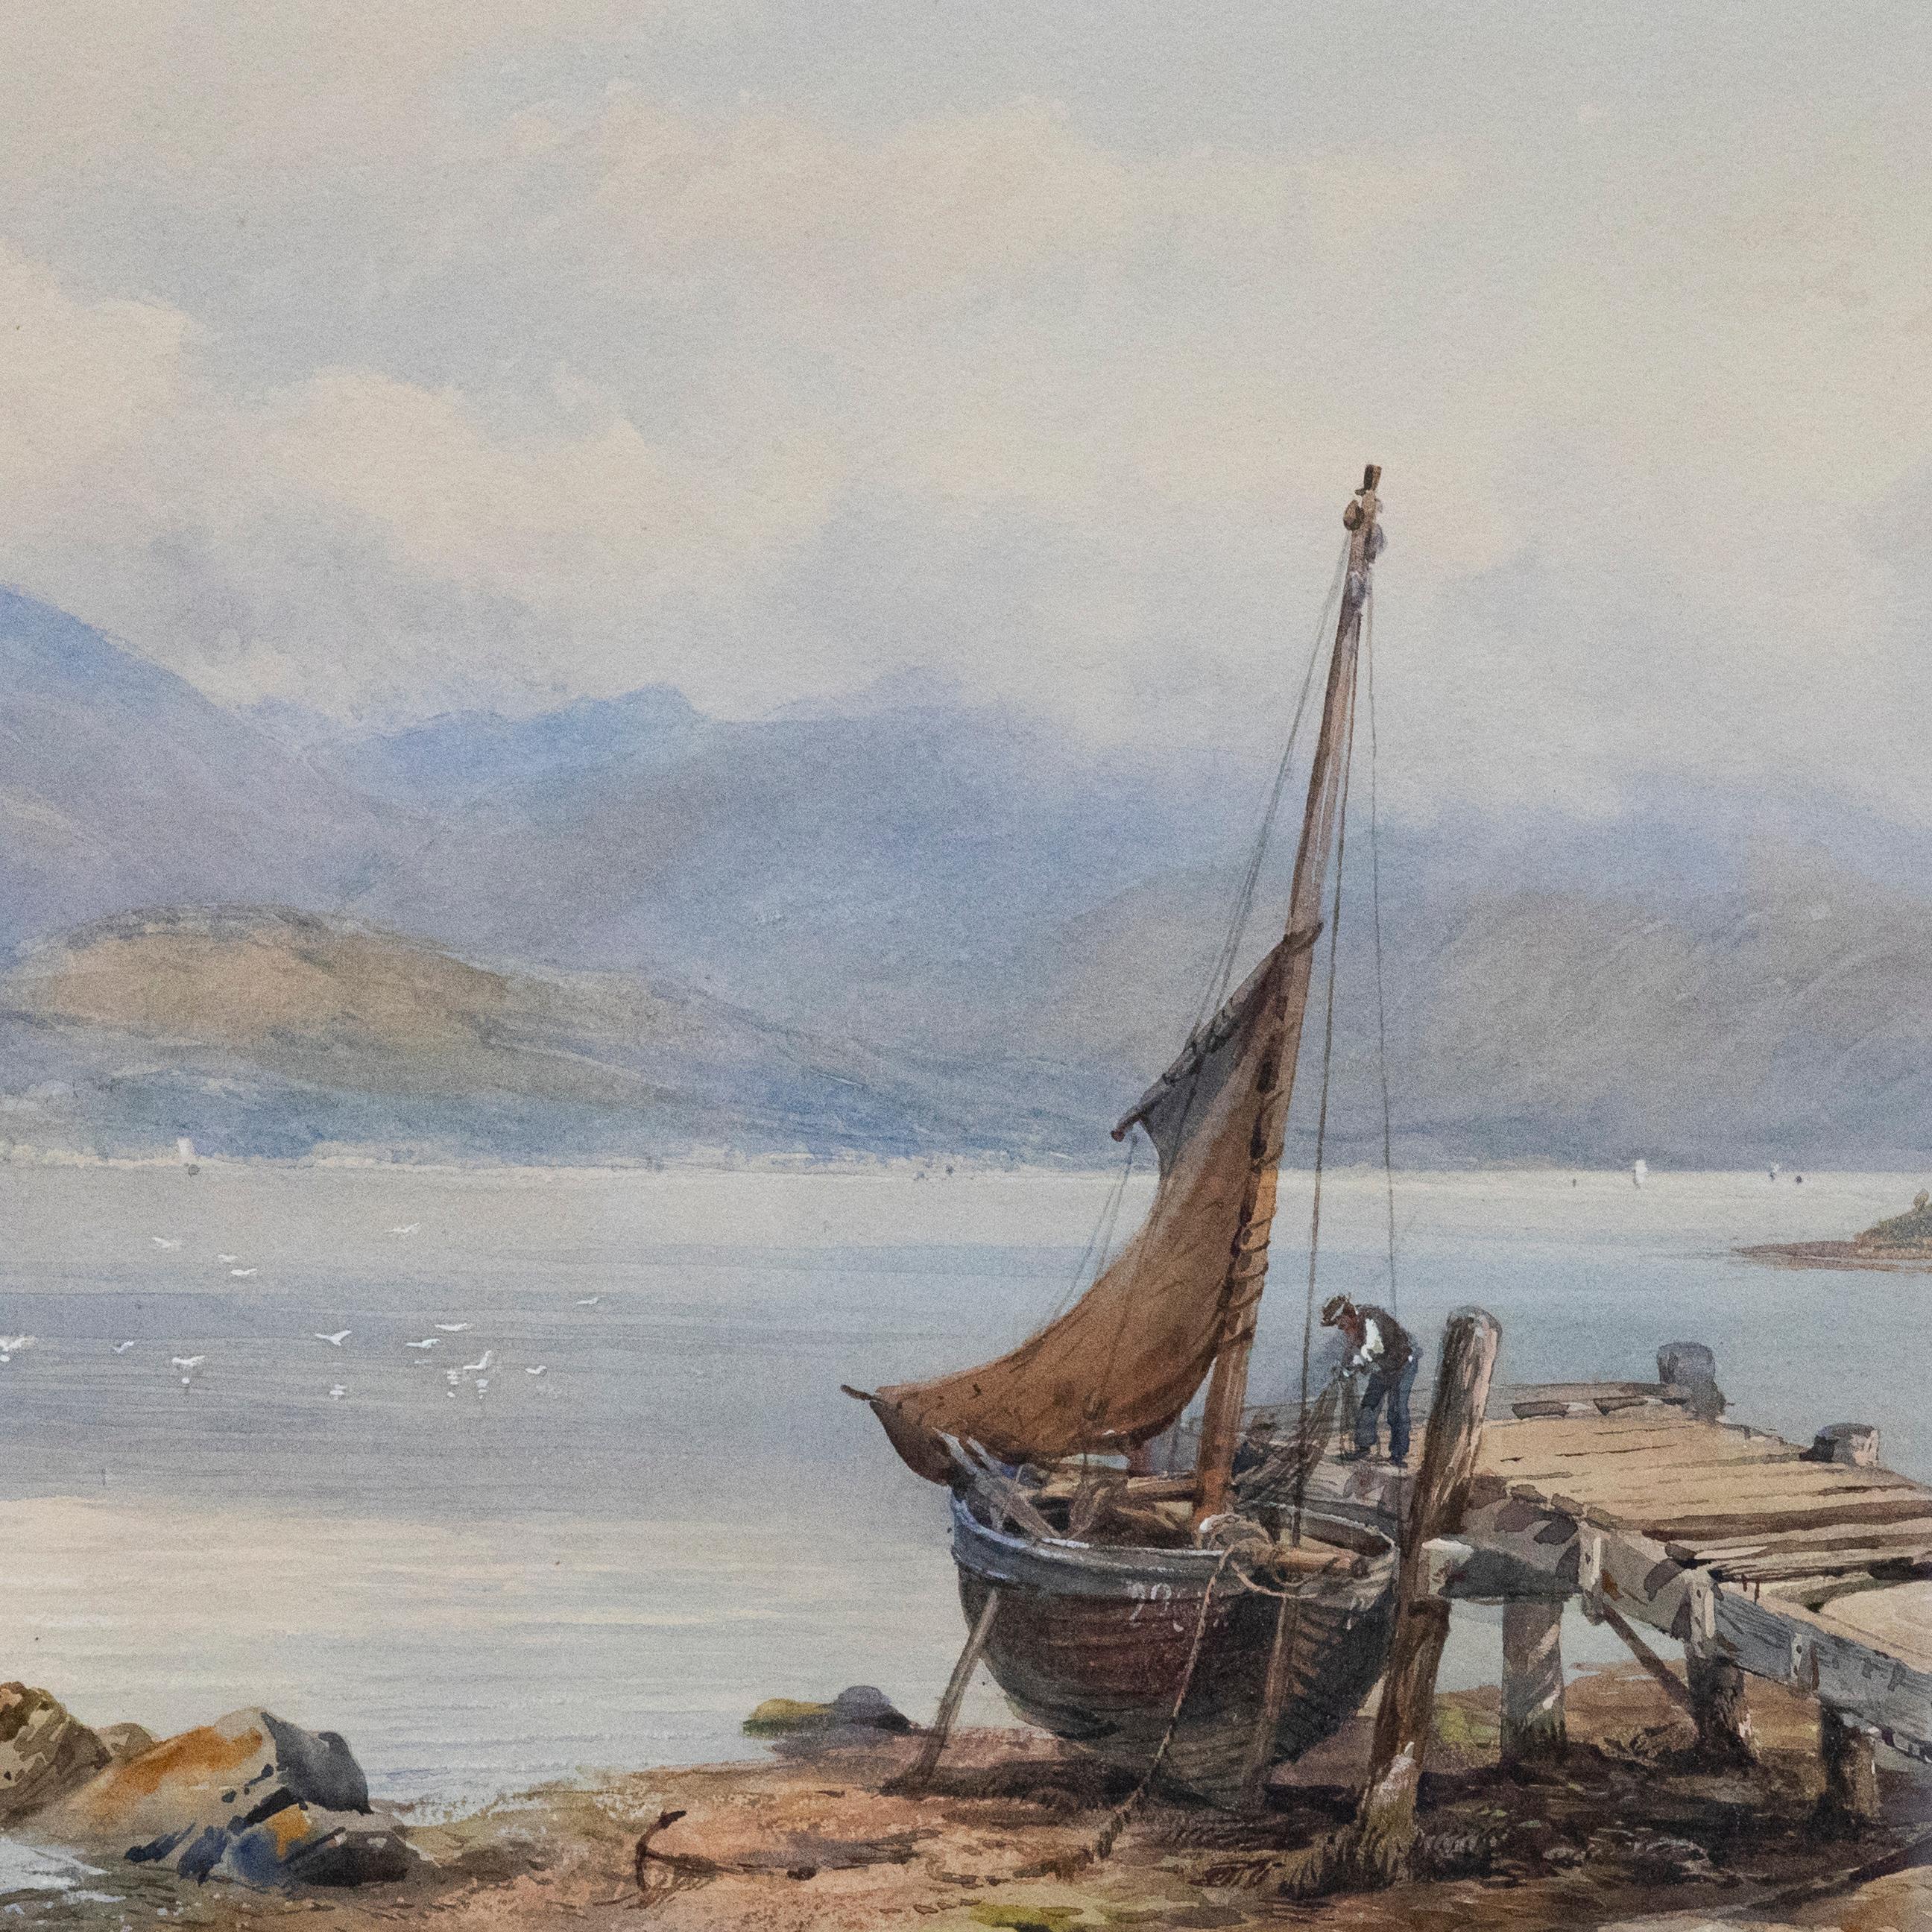 A captivating watercolour painting by Nathaniel Everett Green (1823-1899), depicting boats in an estuary at low tide. The artist has signed the scene to the lower left, and the watercolour has been well-presented in a large gilt frame with delicate